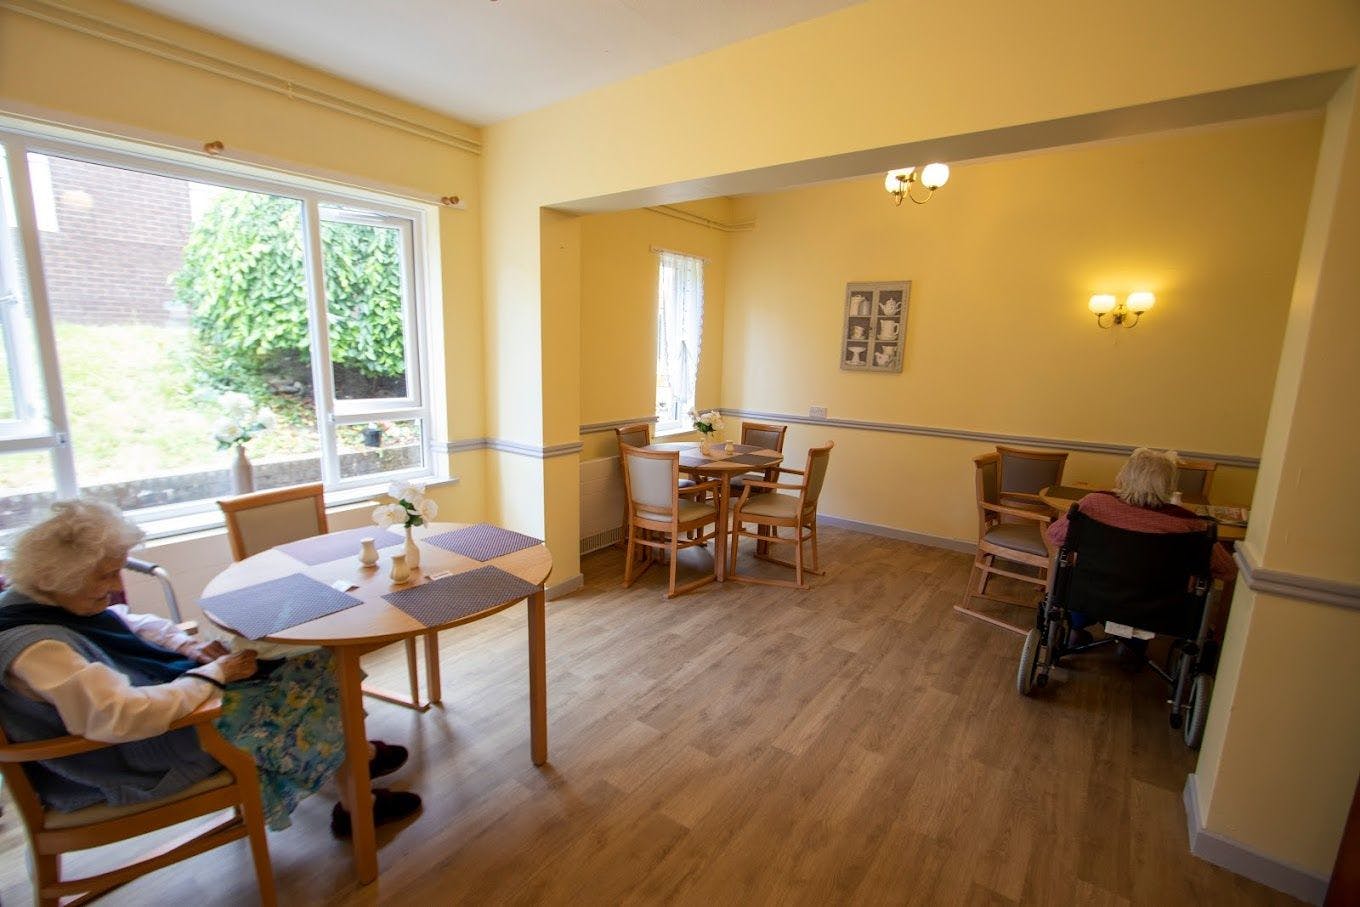 Shaw Healthcare - Wylesfield care home 001